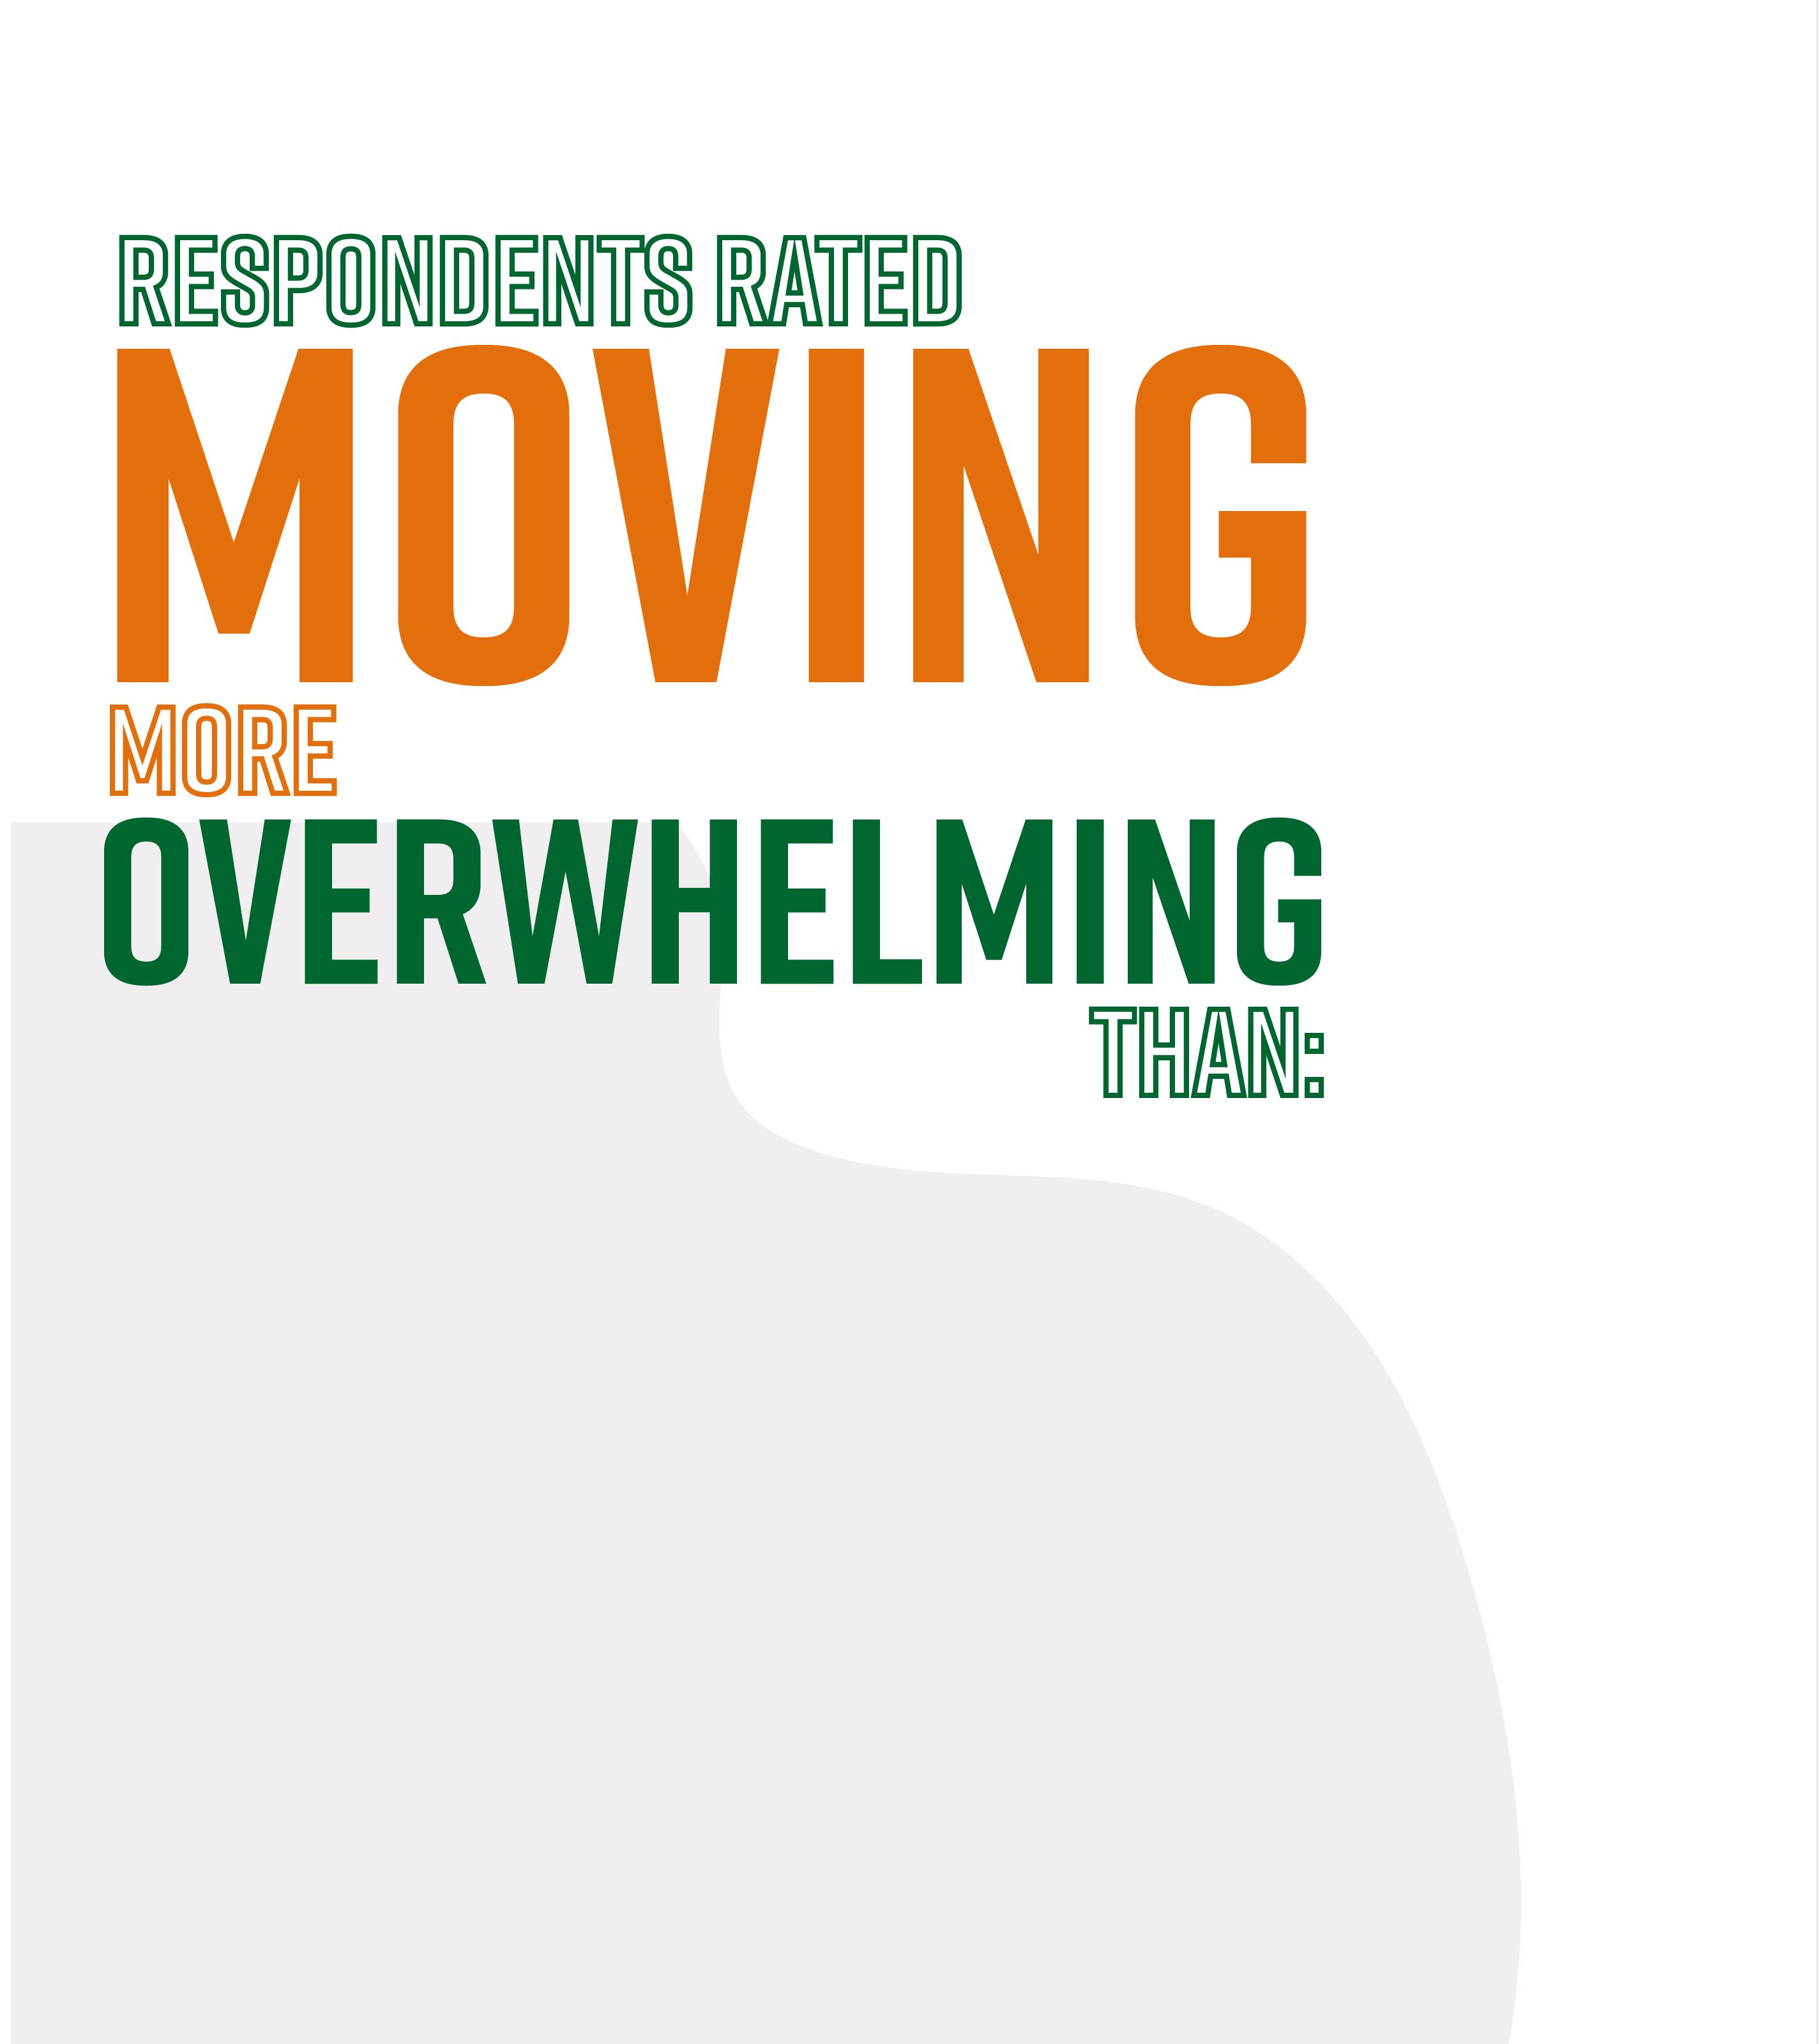 Respondents rated moving as more overwhelming than: